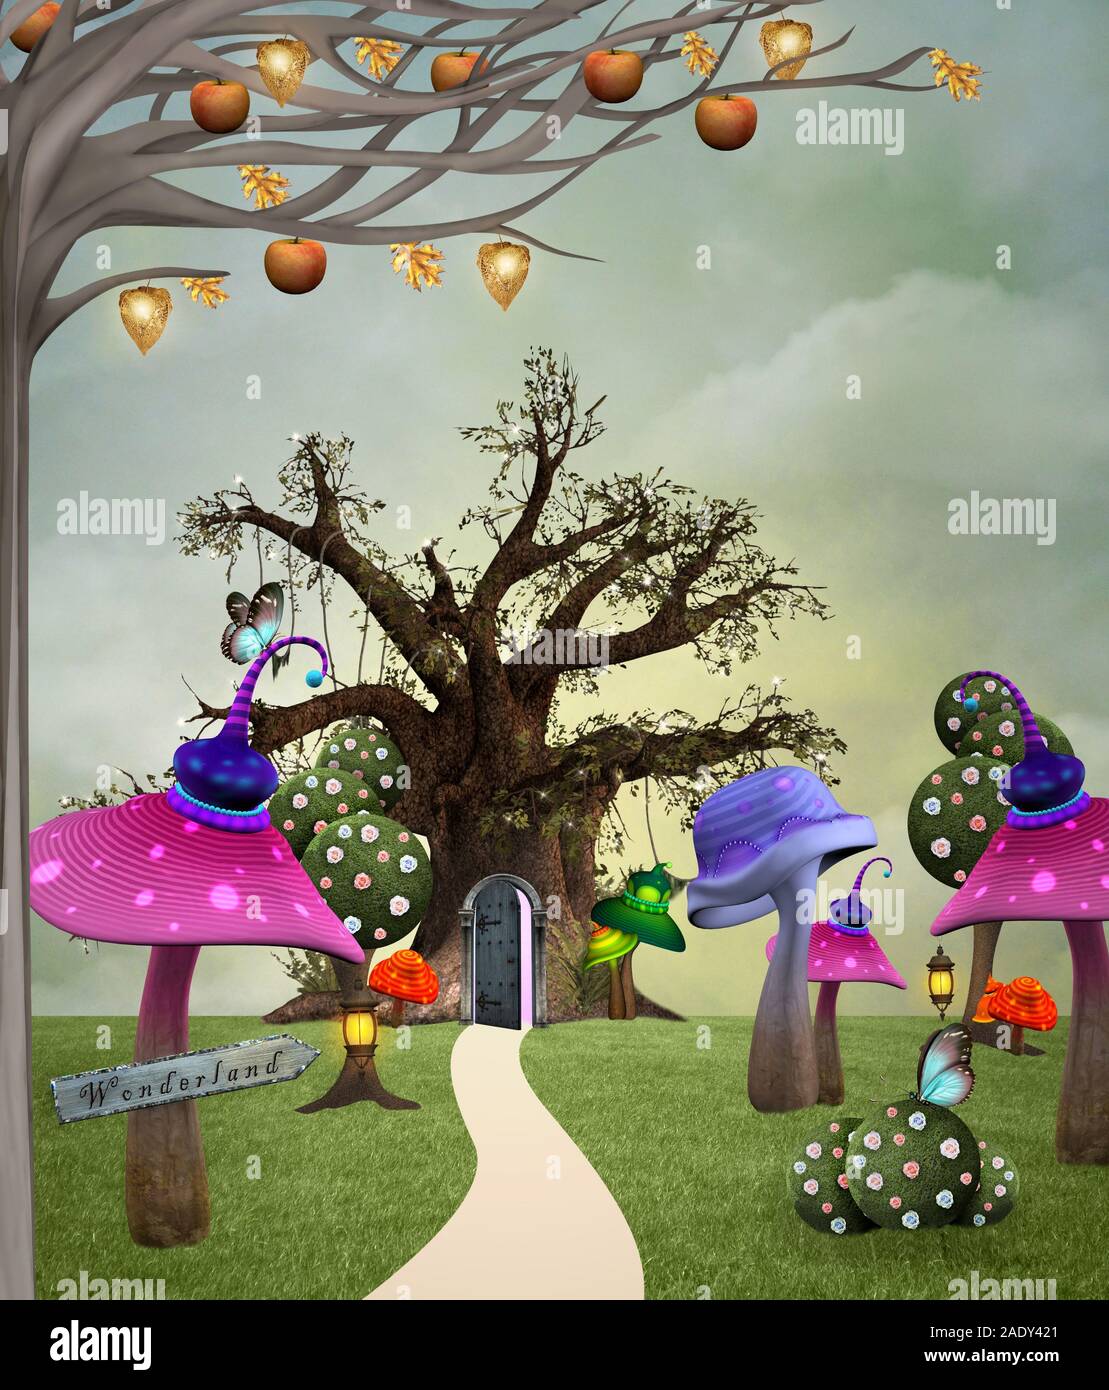 Fantasy garden with colorful mushrooms and tree house with open door Stock Photo